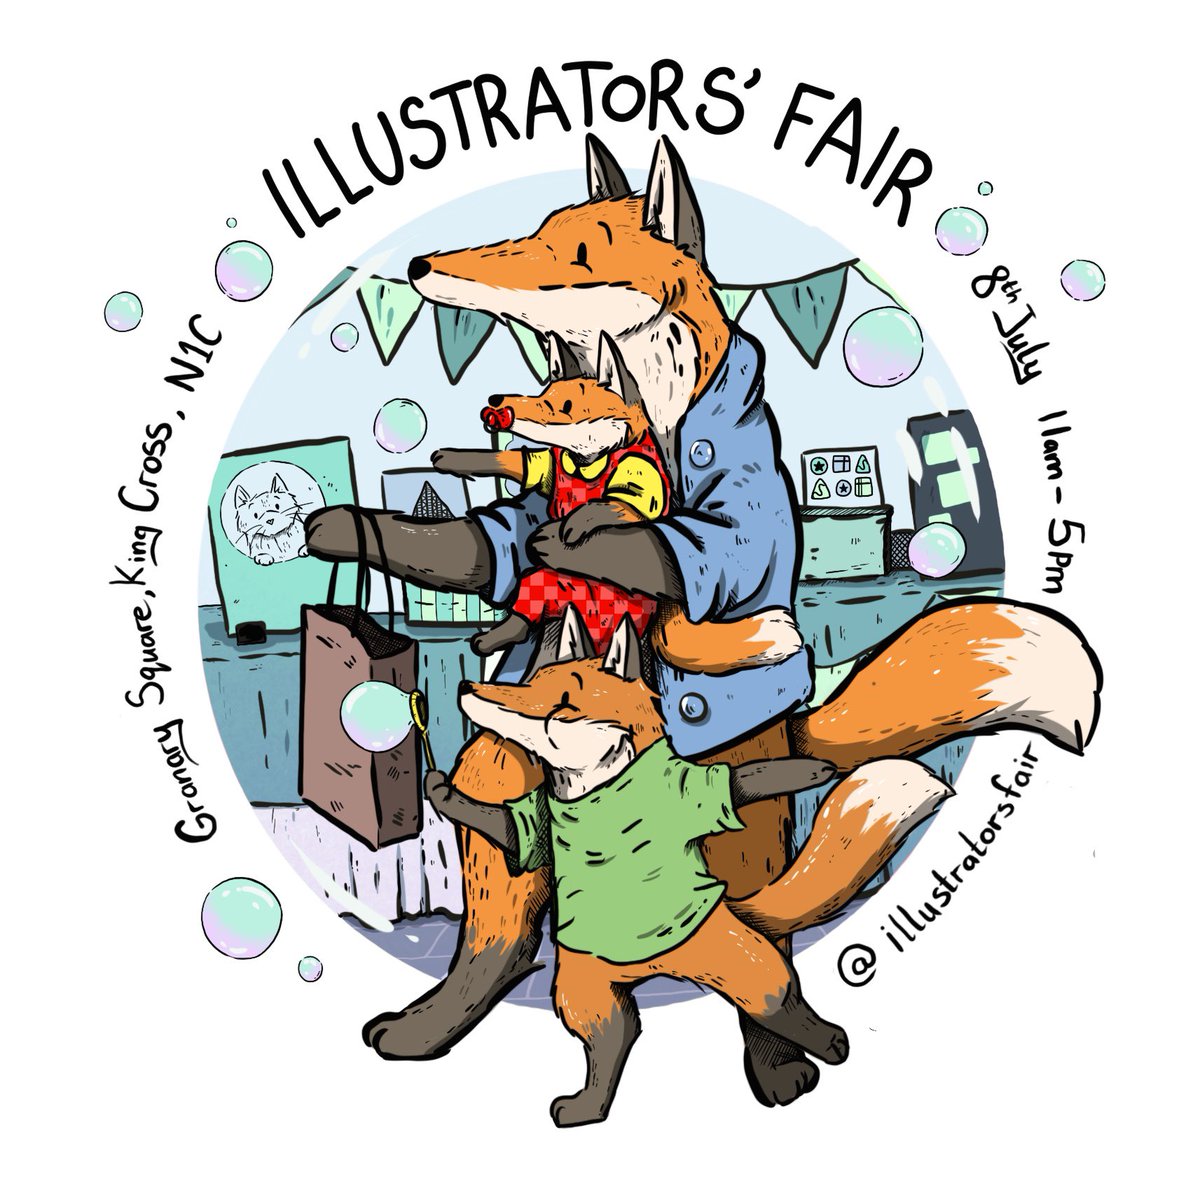 Hi all, 
I’ll be at the @IllustratorsFa1 on the 8th July in London. I’m so excited to be taking part again and seeing all the amazing artwork everyone has been creating. ☺️

#illustratorsfair #festivalofflyers #illustration